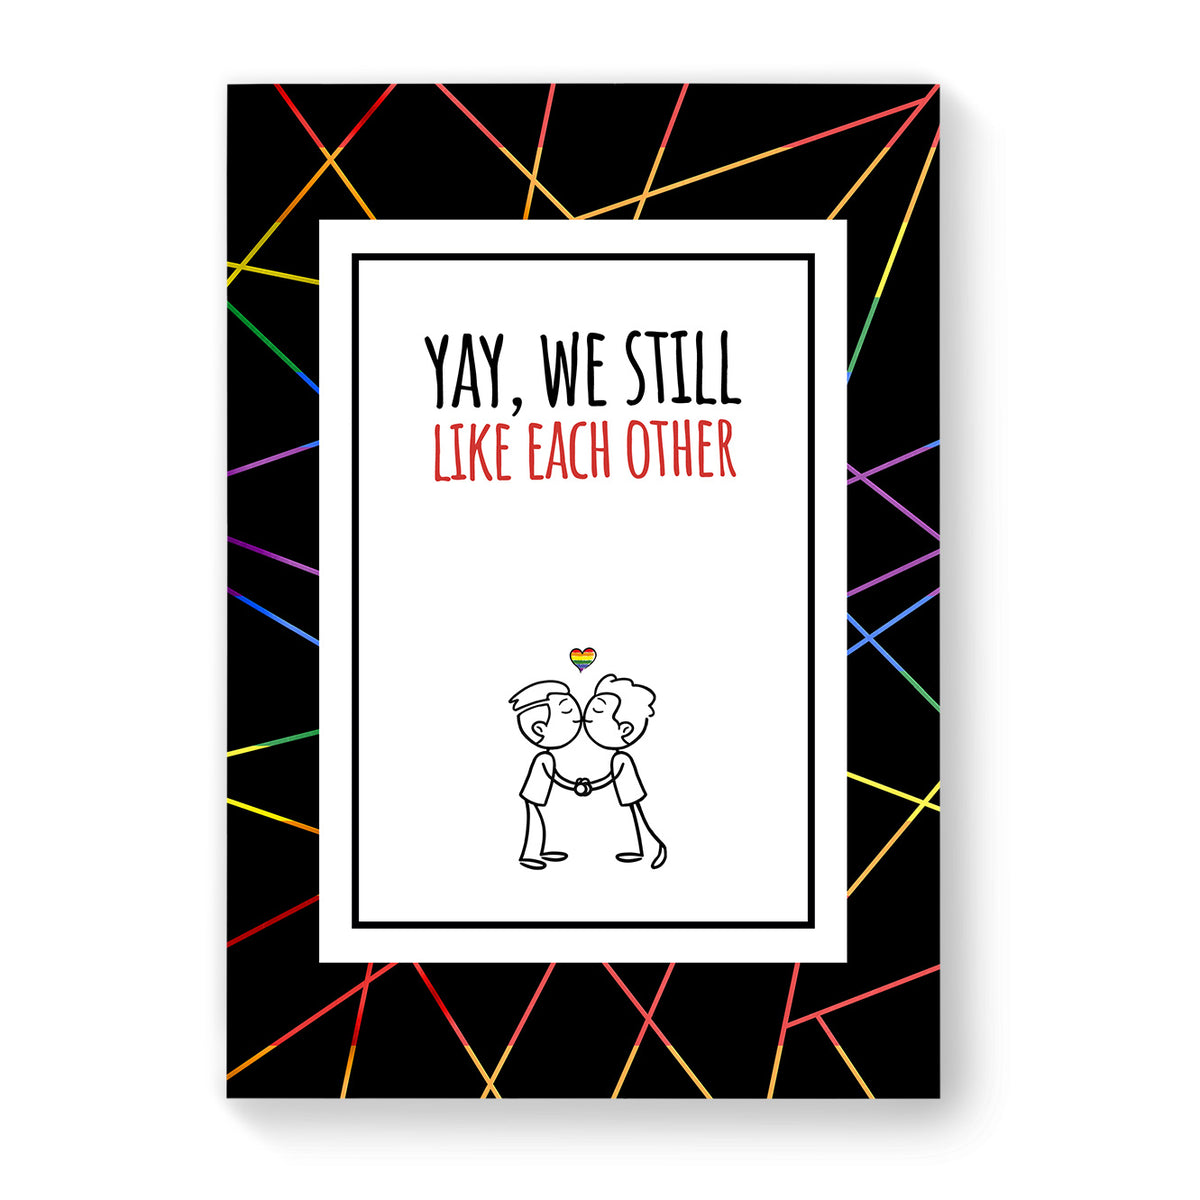 Yay, we still like each other - Gay Couple Card - Black Geometric | Gift